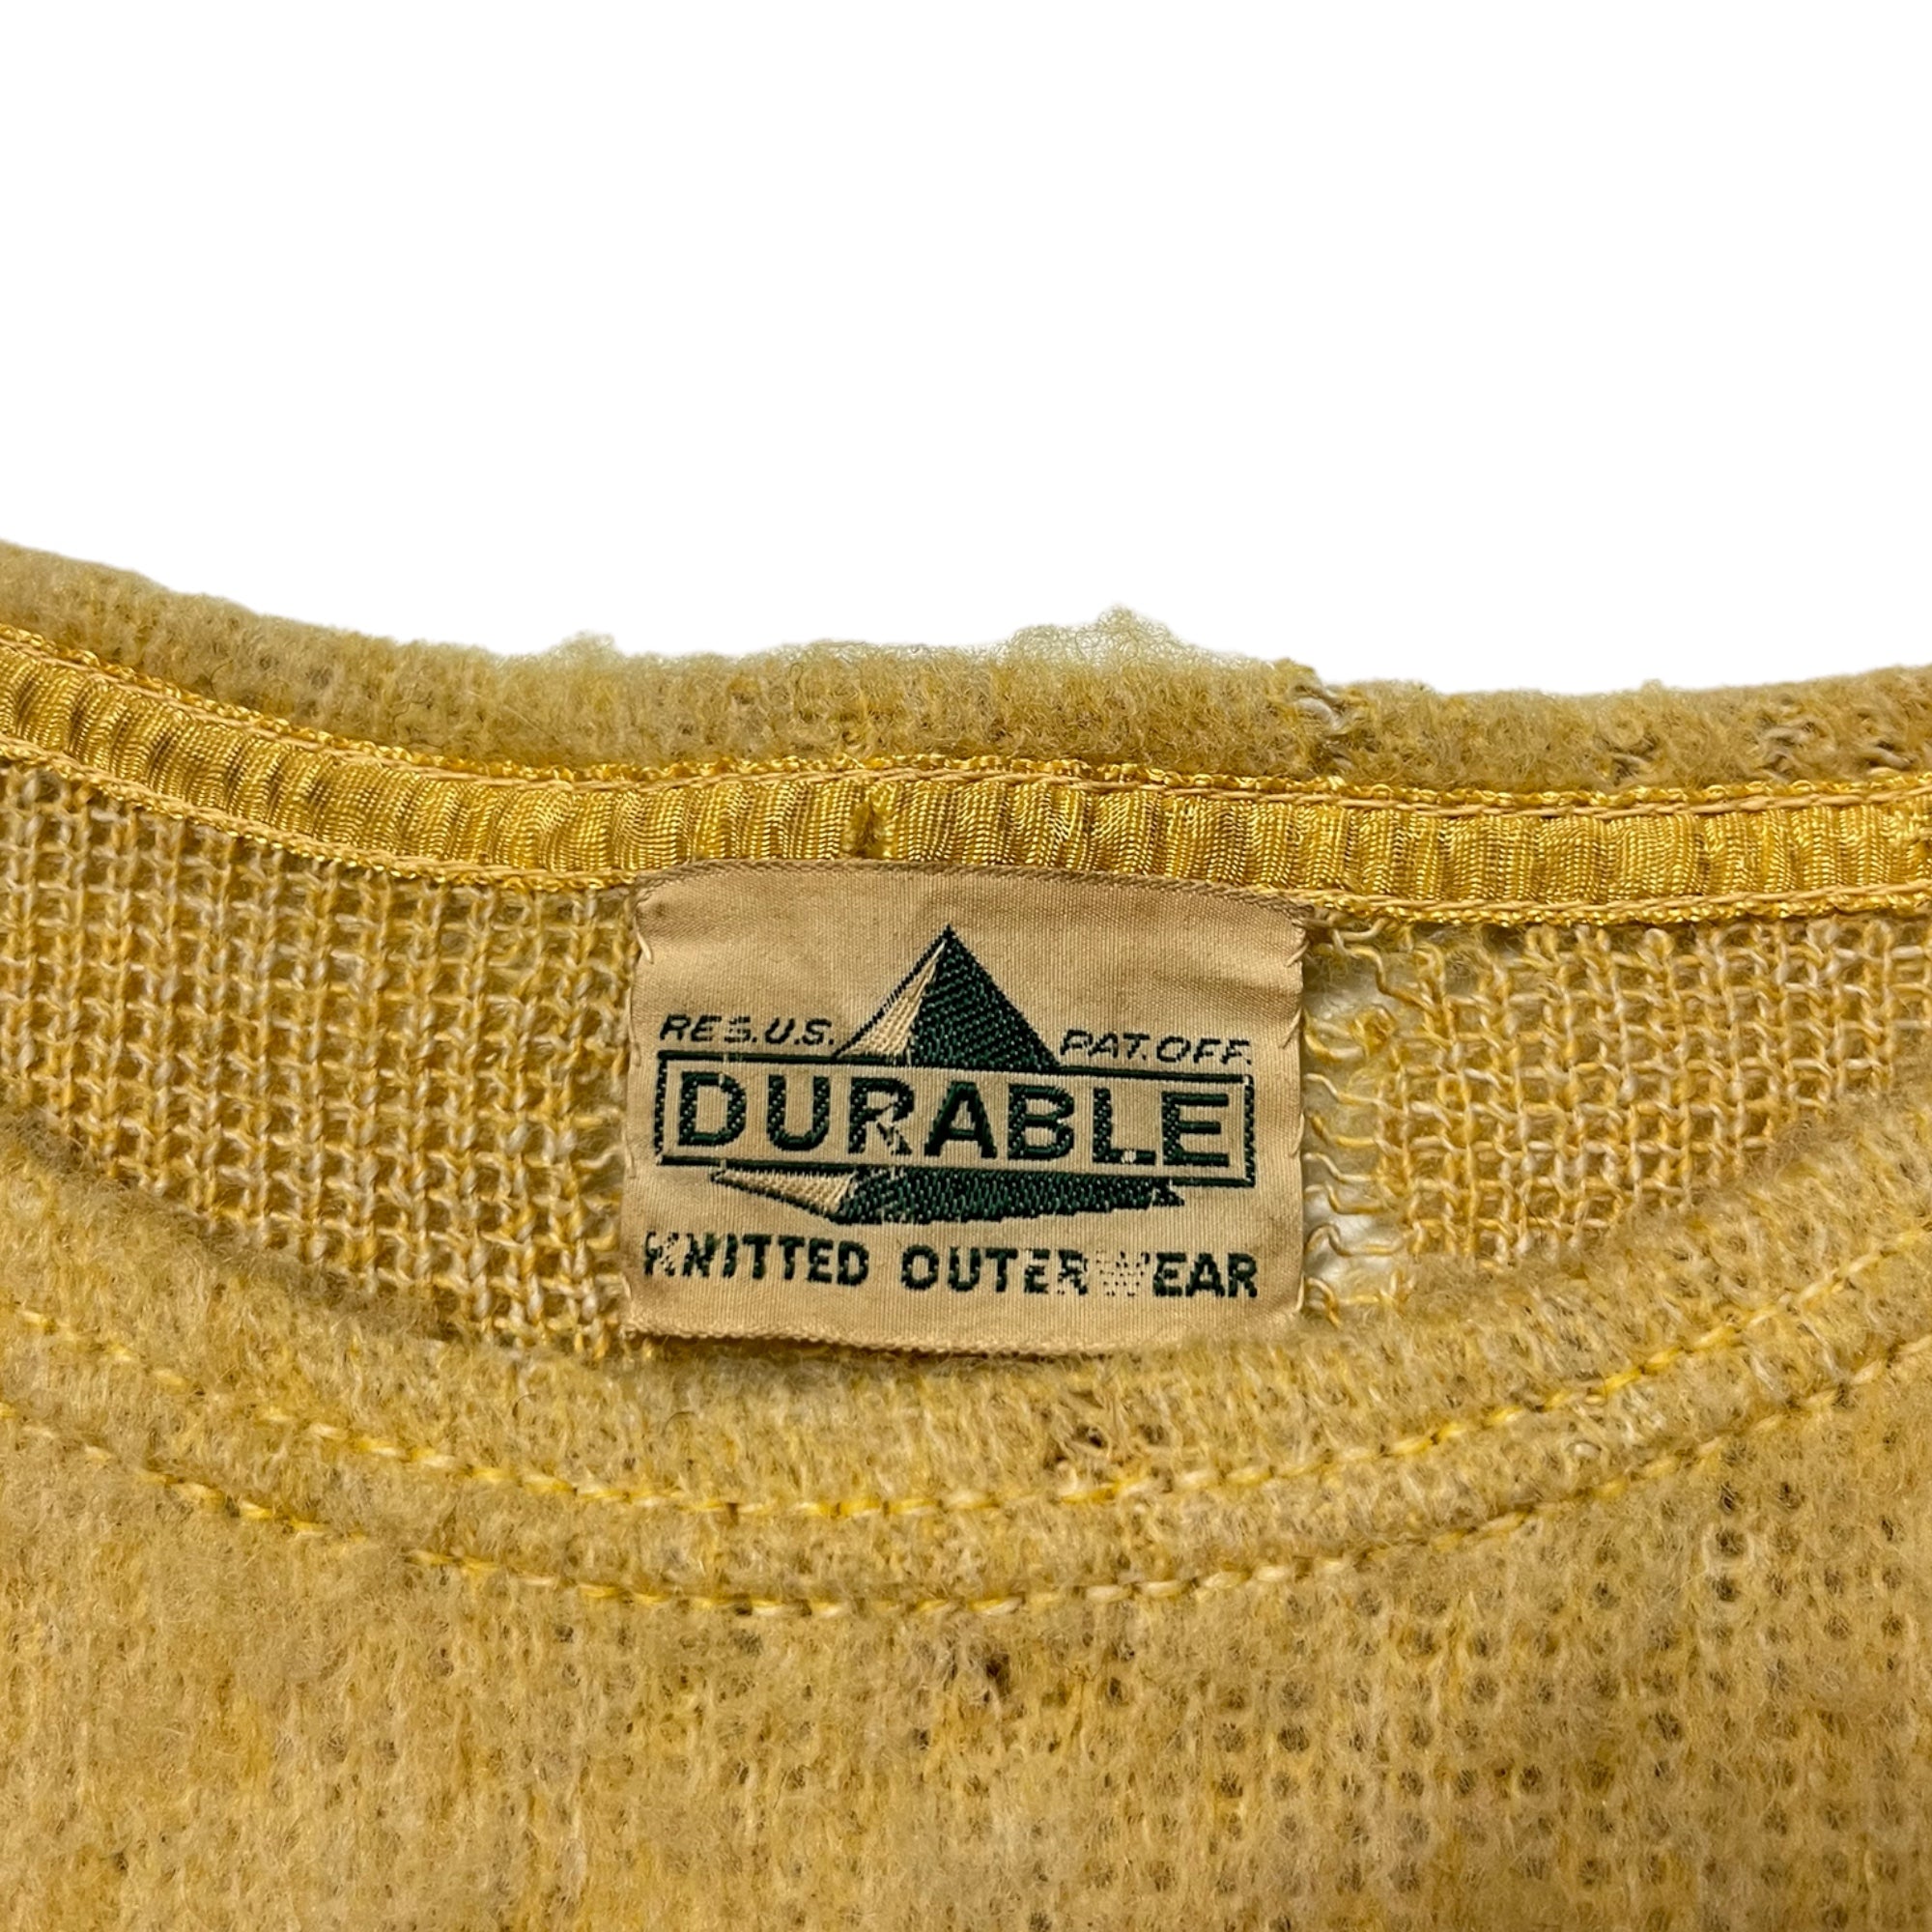 1950s Distressed ‘Durable’ Brand Knit Sweater Top - Fields of Gold/Tan - S/M